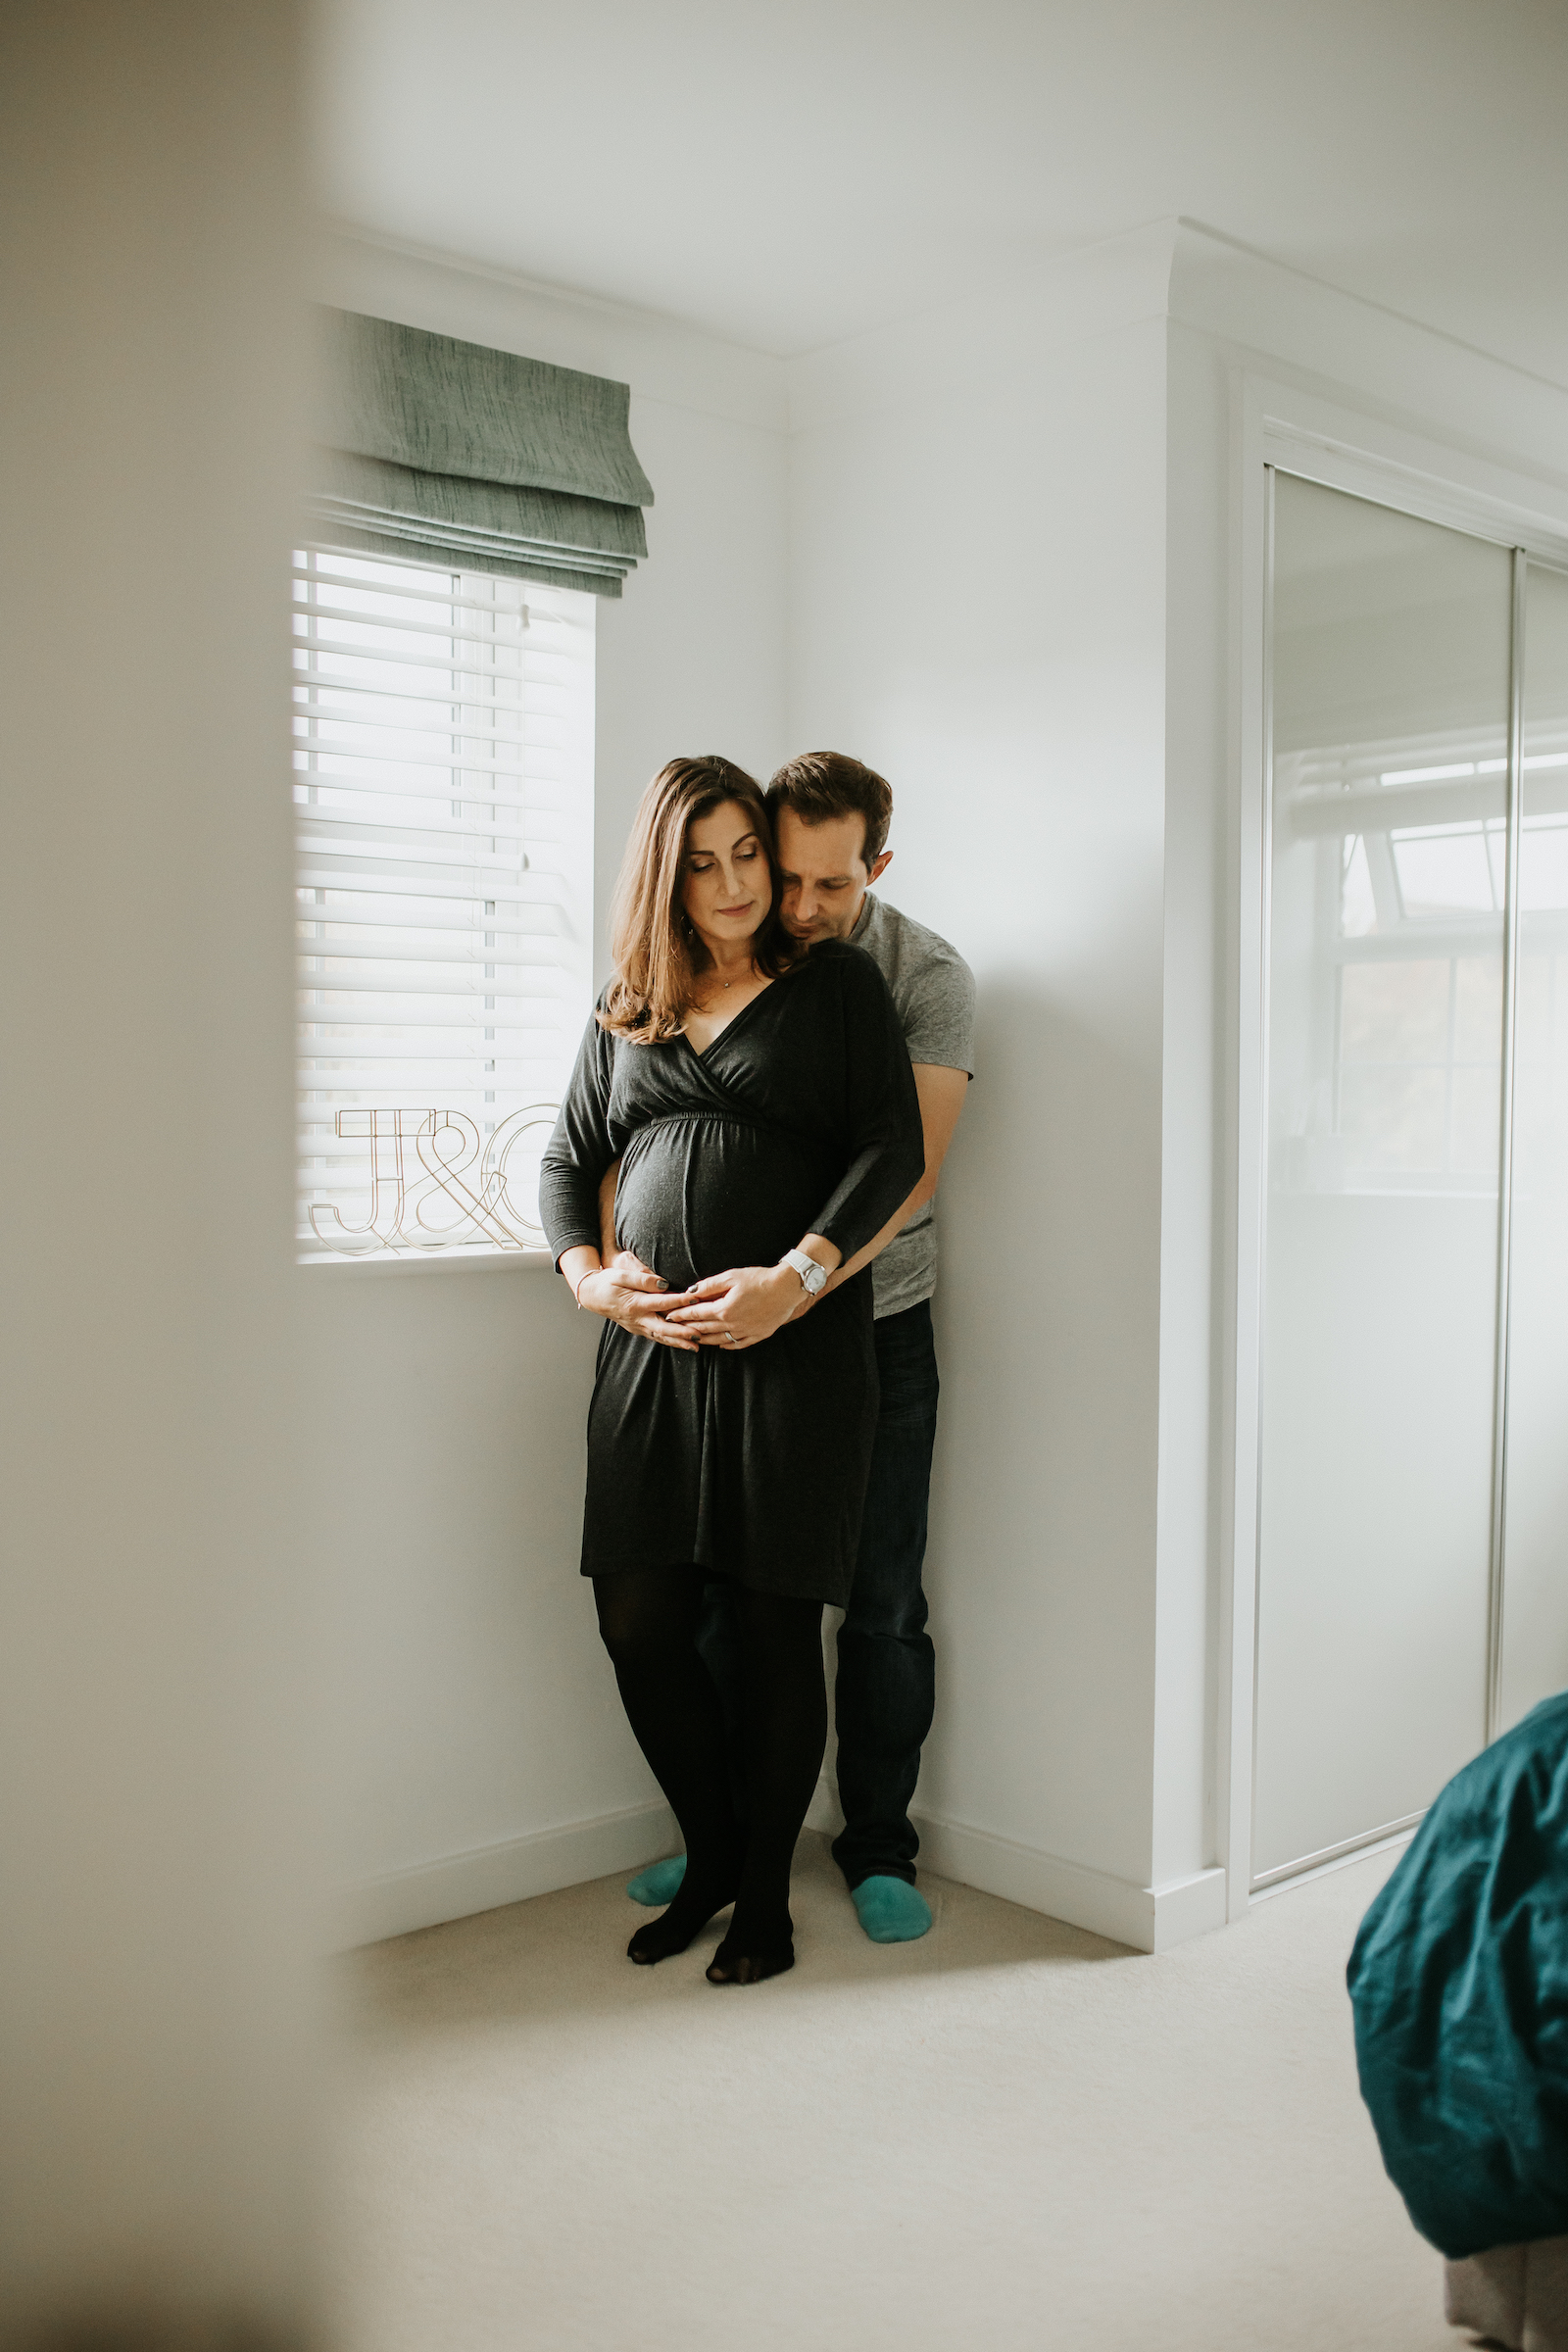 Maternity photoshoot - mum and dad to be holding baby bump